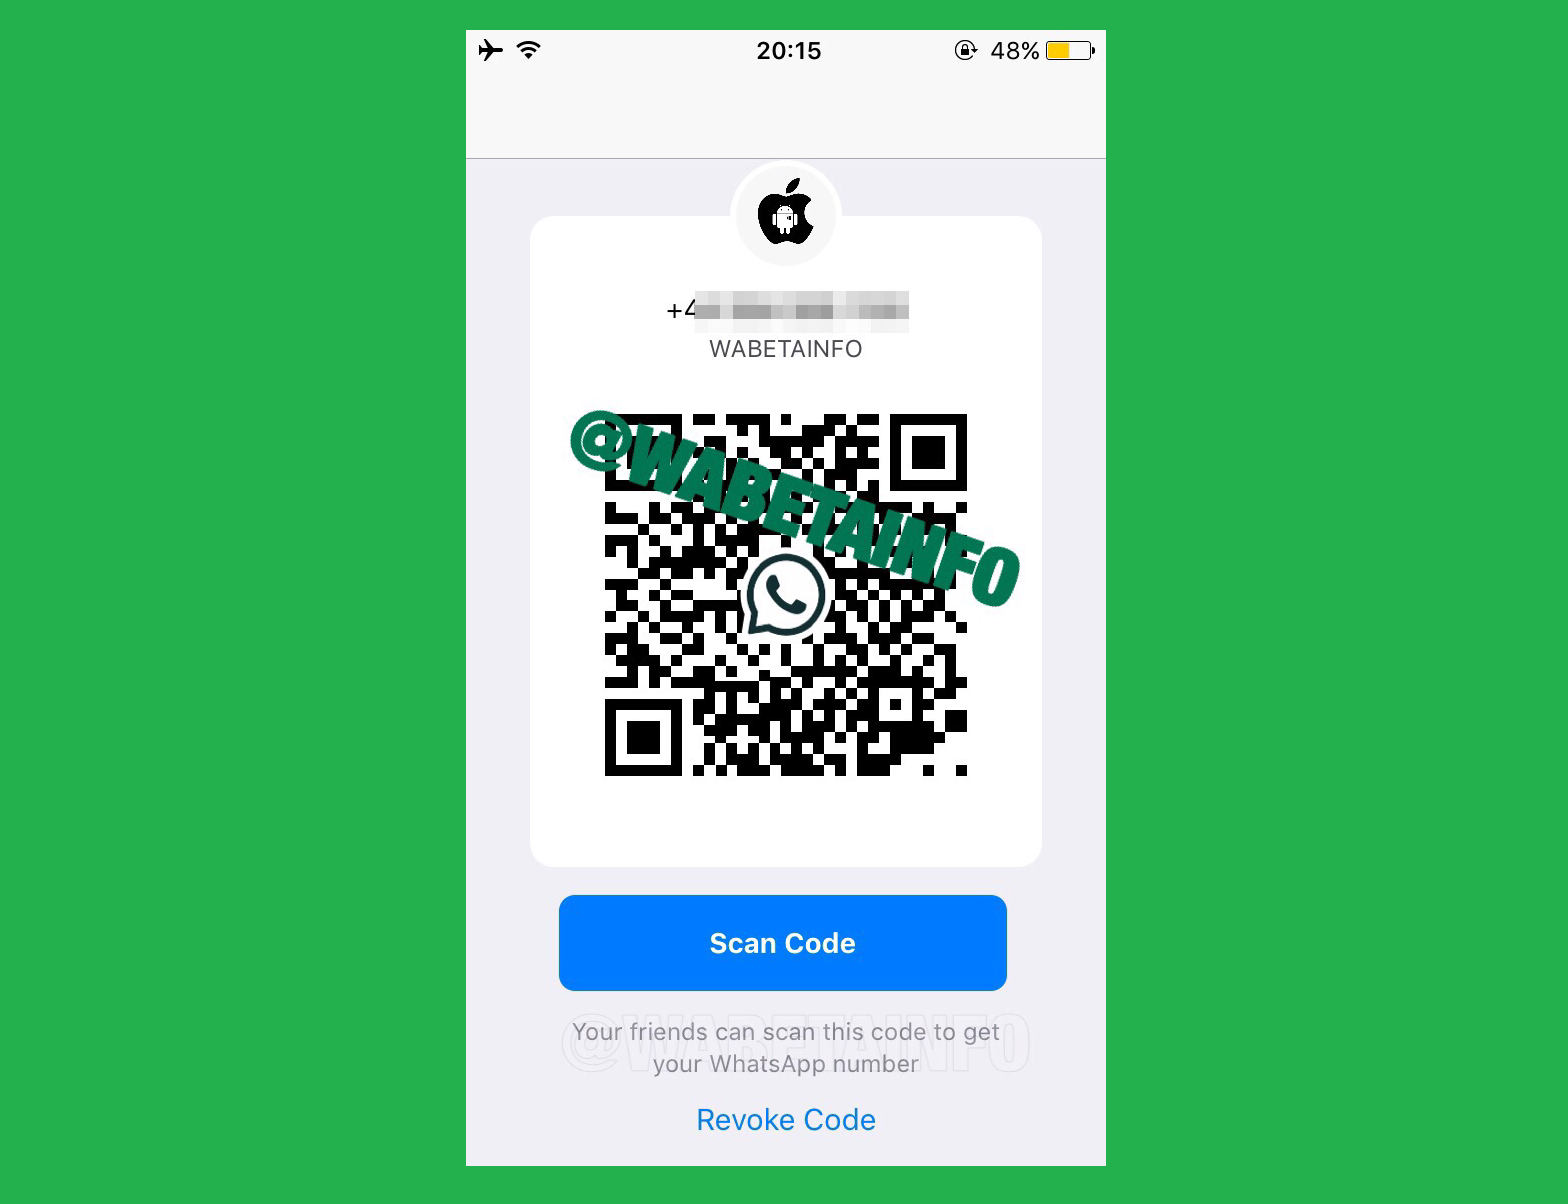 QR feature in the latest update will let WhatsApp users share their QR codes to add contacts, making messaging easier.